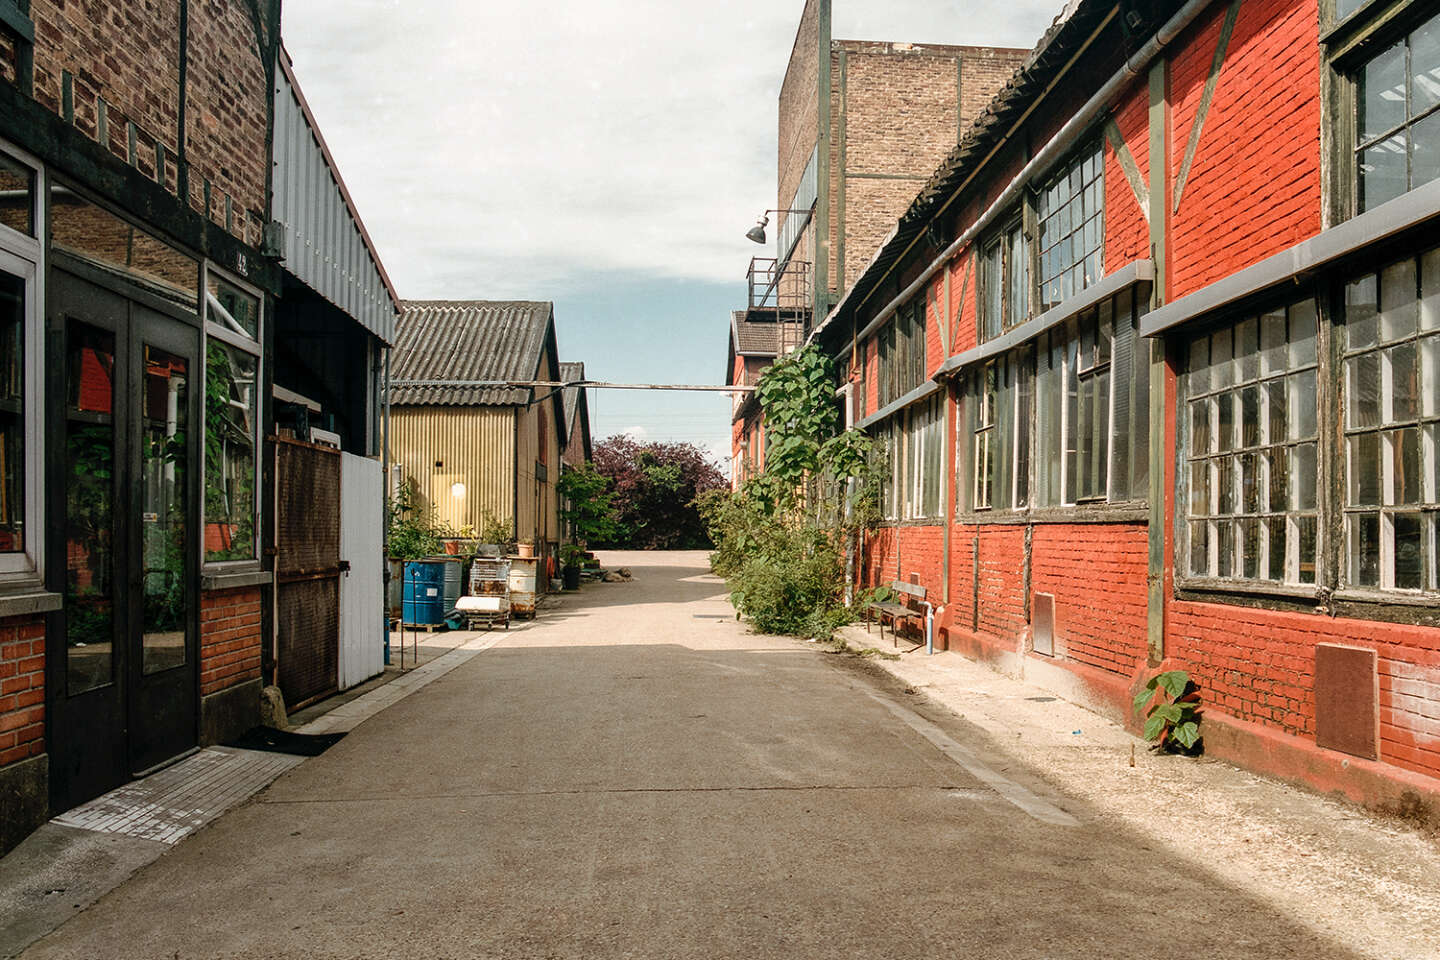 In Saint-Denis, the village of construction of goldsmiths